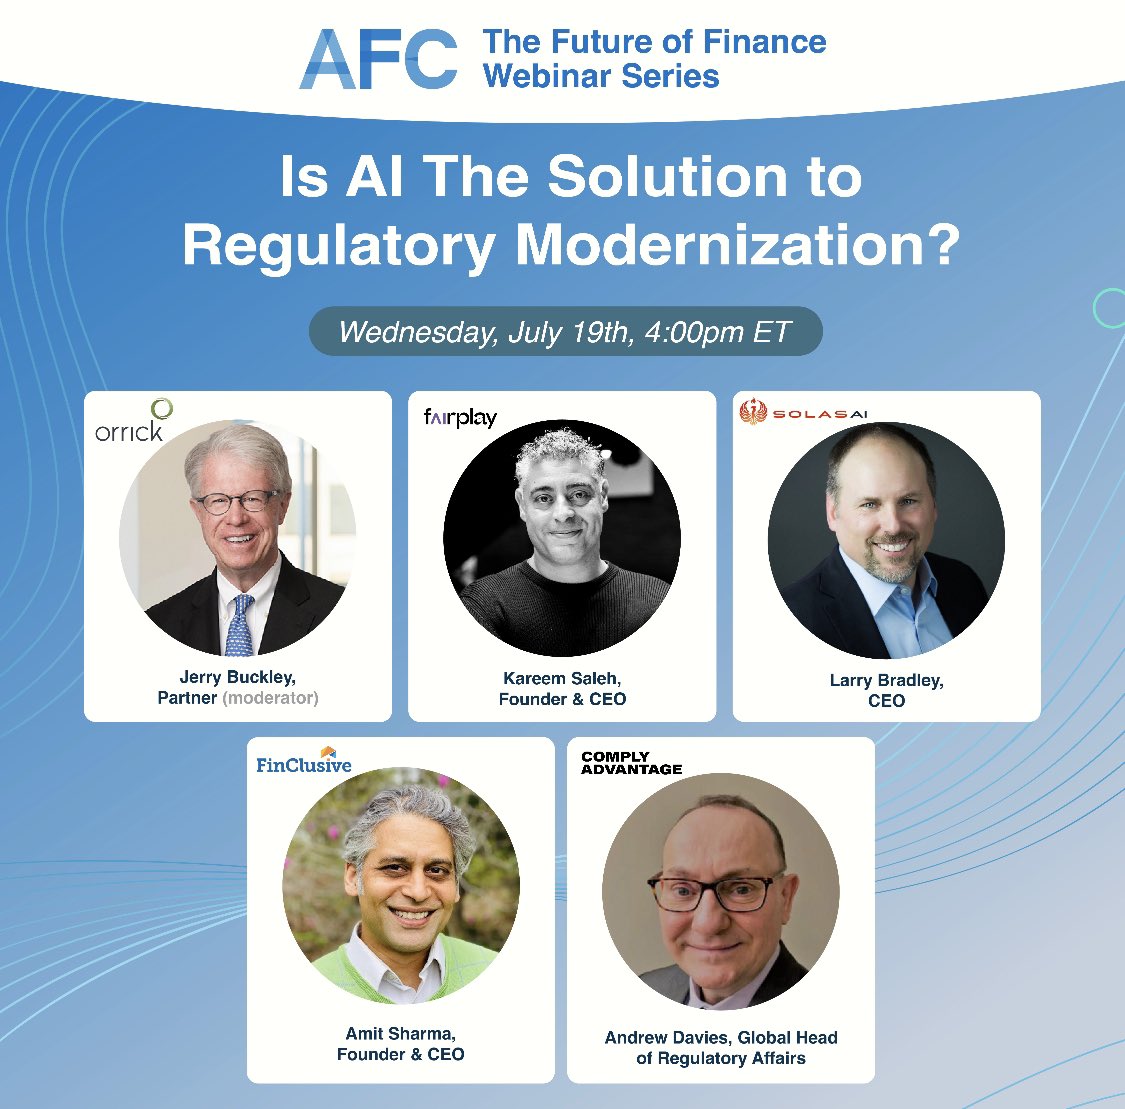 Is #AI the solution to Regulatory Modernization? JOIN US for our latest #FutureOfFinance #Webinar w/ leading companies and experts including @FairplayAi, @FinClusiveCap, @ComplyAdvantage, @solas_ai moderated by our great friends at @Orrick REGISTER: fintechcouncil-org.zoom.us/webinar/regist…